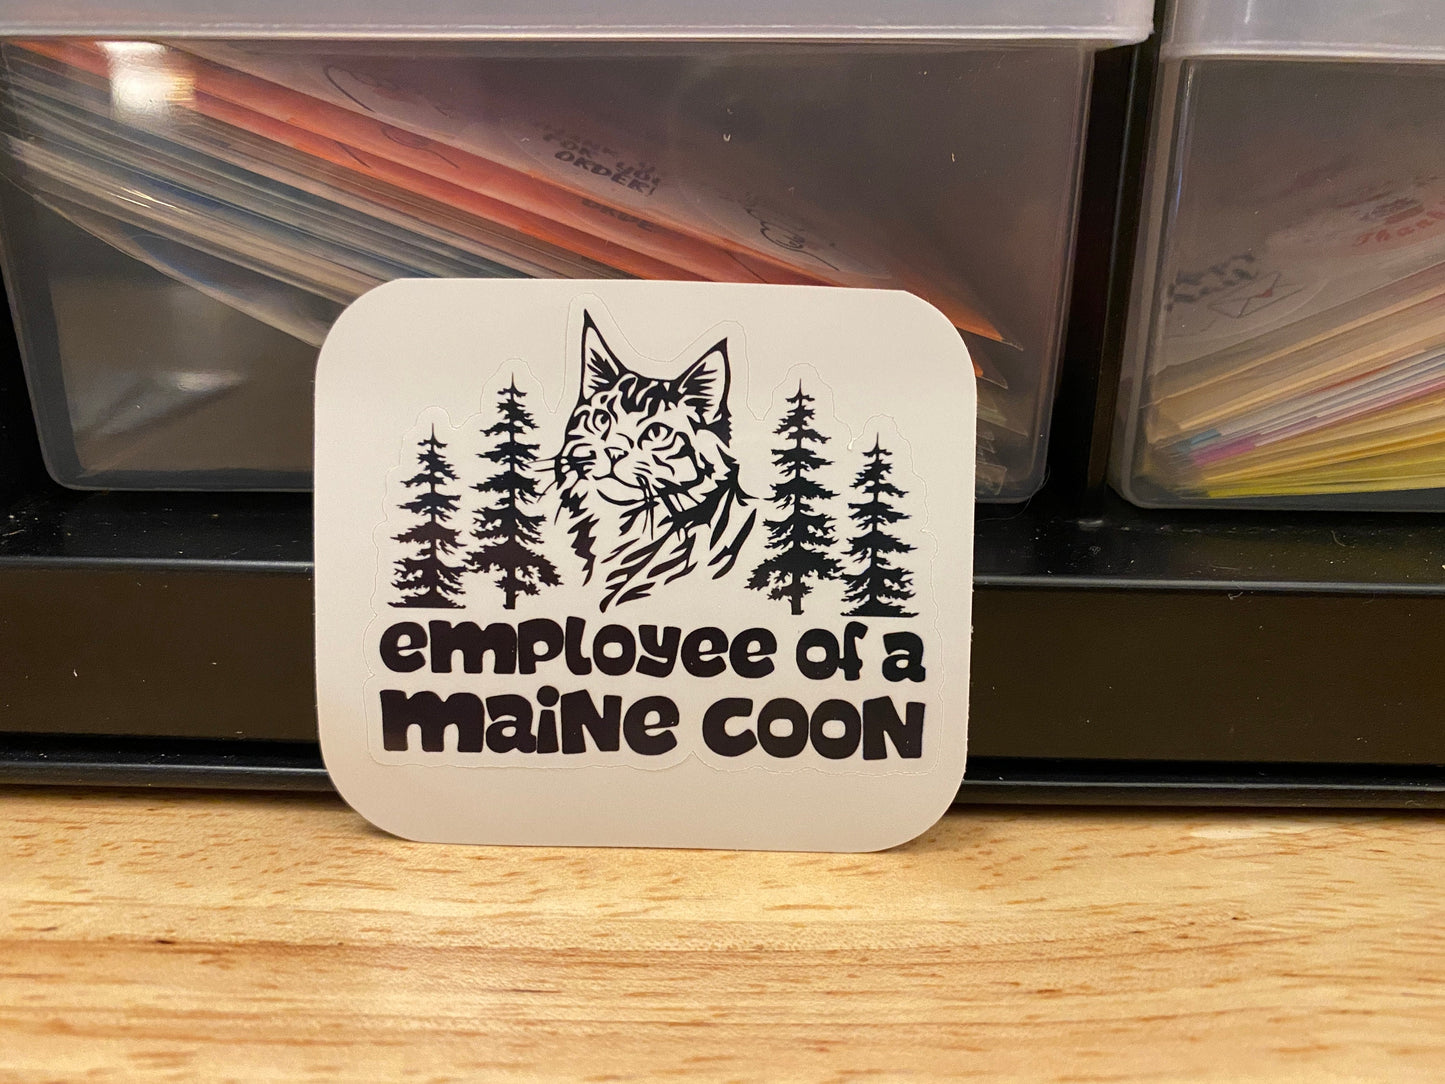 Employee of a Maine Coon Sticker, Maine Coon Employee sticker, Maine Coon Sticker, Dad sticker, Cat Dad sticker, mom sticker, cat mom